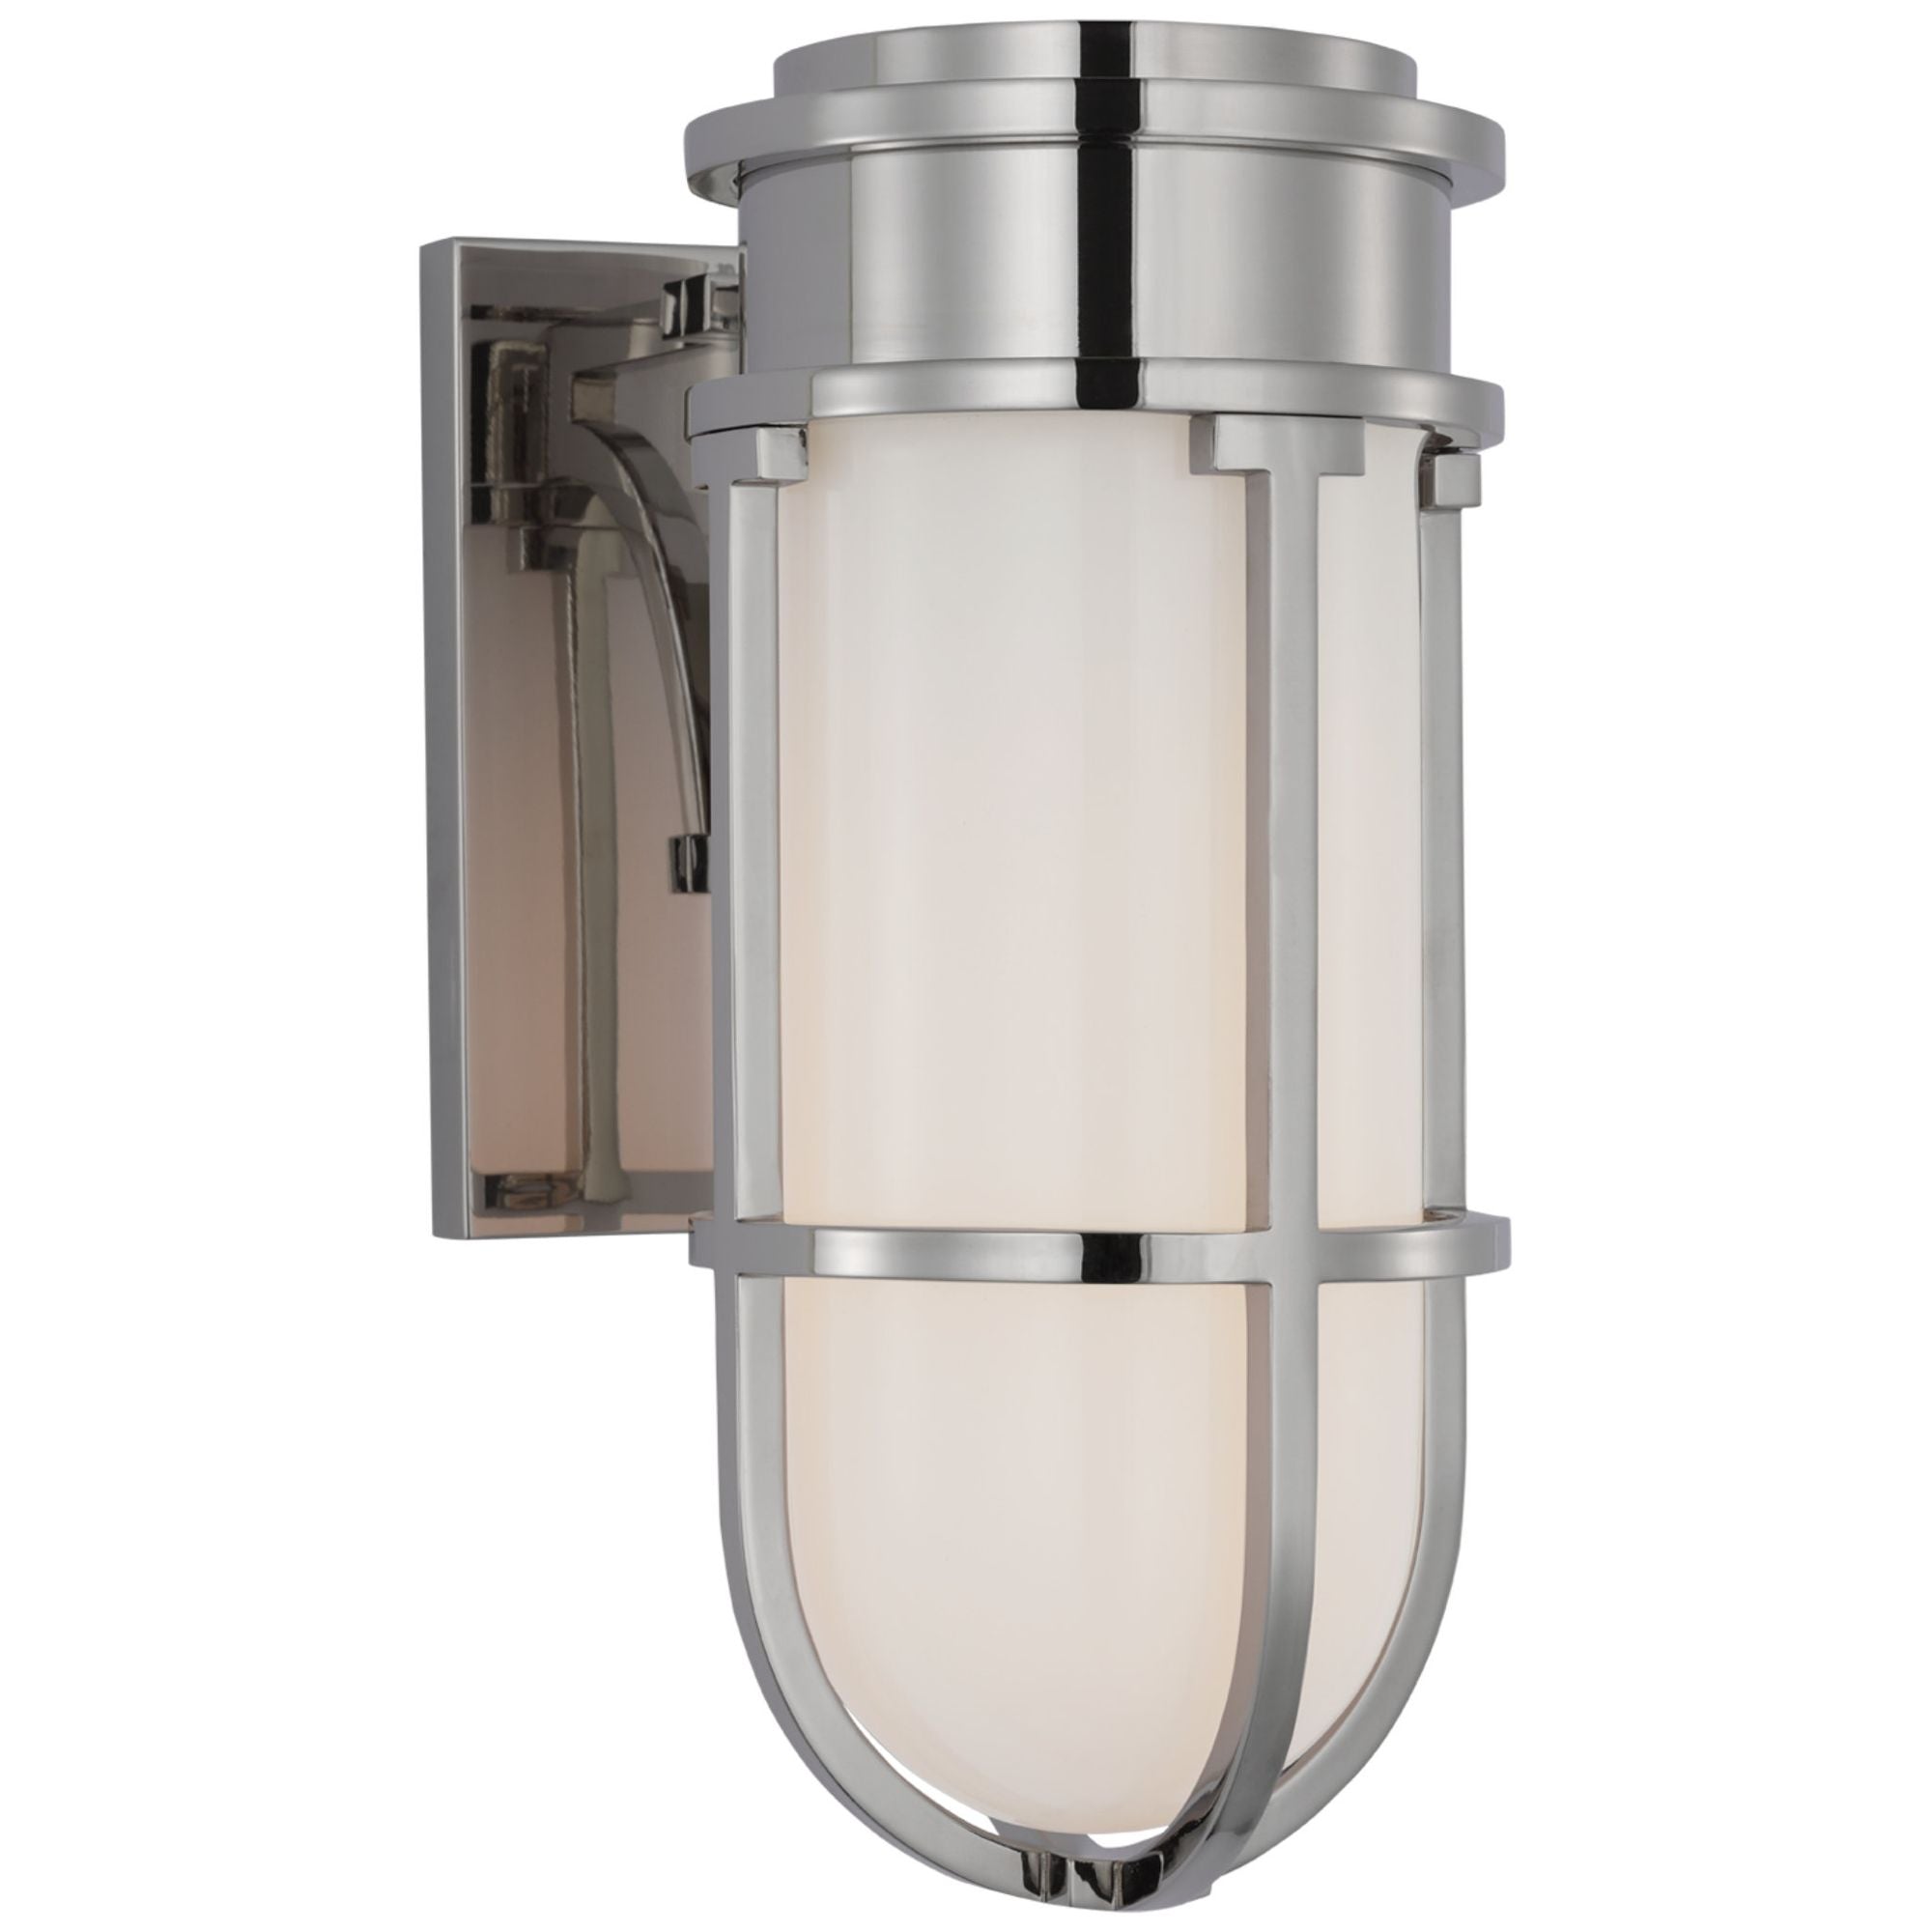 Chapman & Myers Gracie Tall Bracketed Sconce in Polished Nickel with White Glass